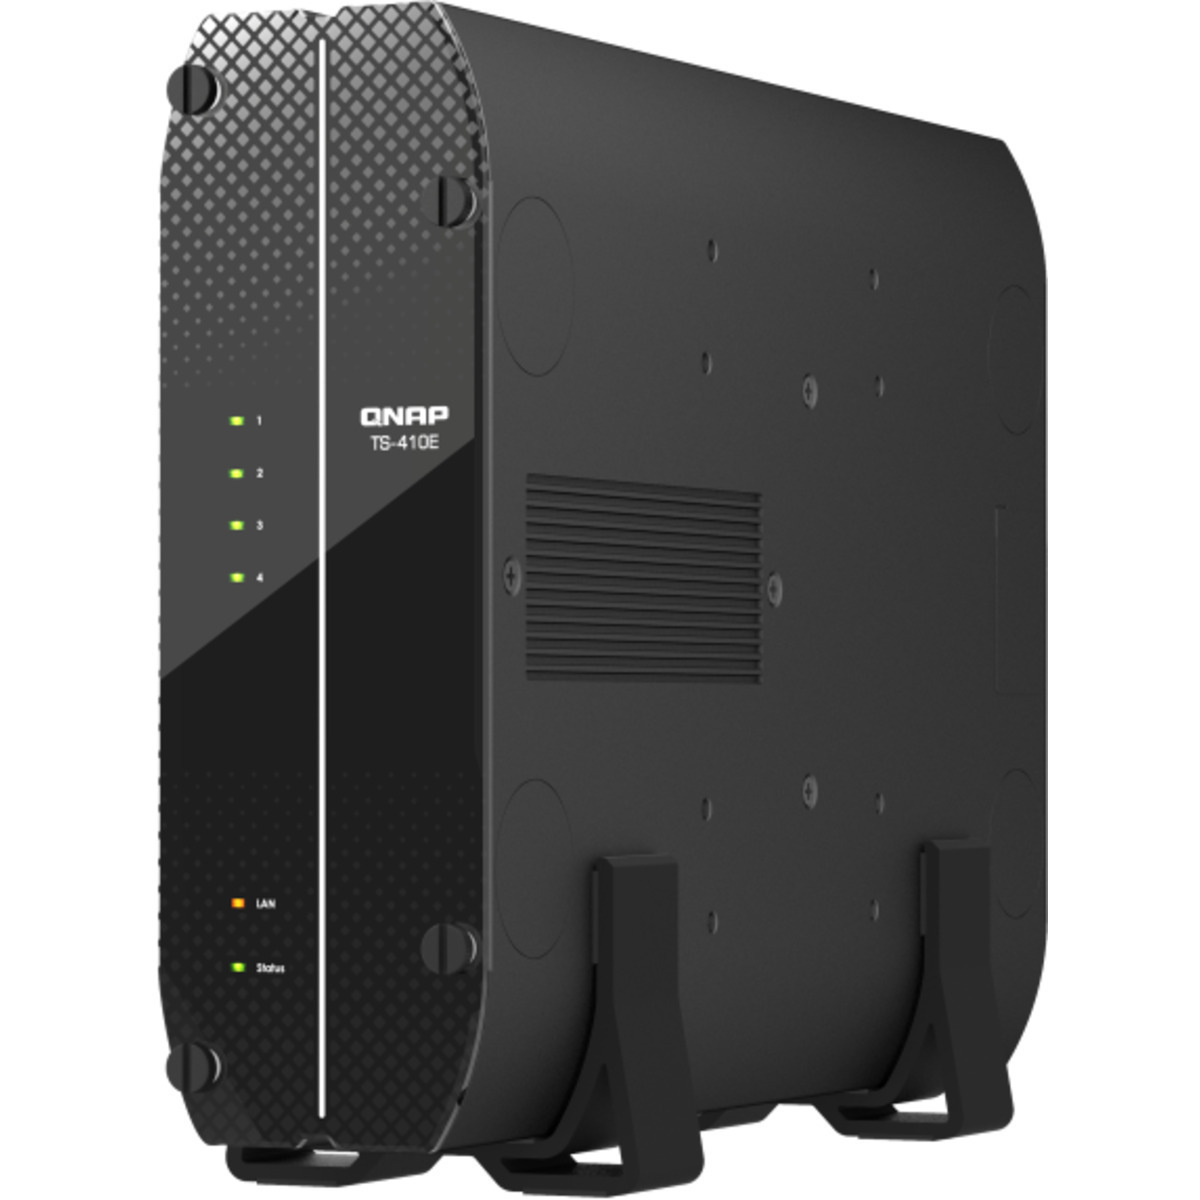 QNAP TS-410E 4tb 4-Bay Desktop Multimedia / Power User / Business NAS - Network Attached Storage Device 2x2tb Sandisk Ultra 3D SDSSDH3-2T00 2.5 560/520MB/s SATA 6Gb/s SSD CONSUMER Class Drives Installed - Burn-In Tested TS-410E